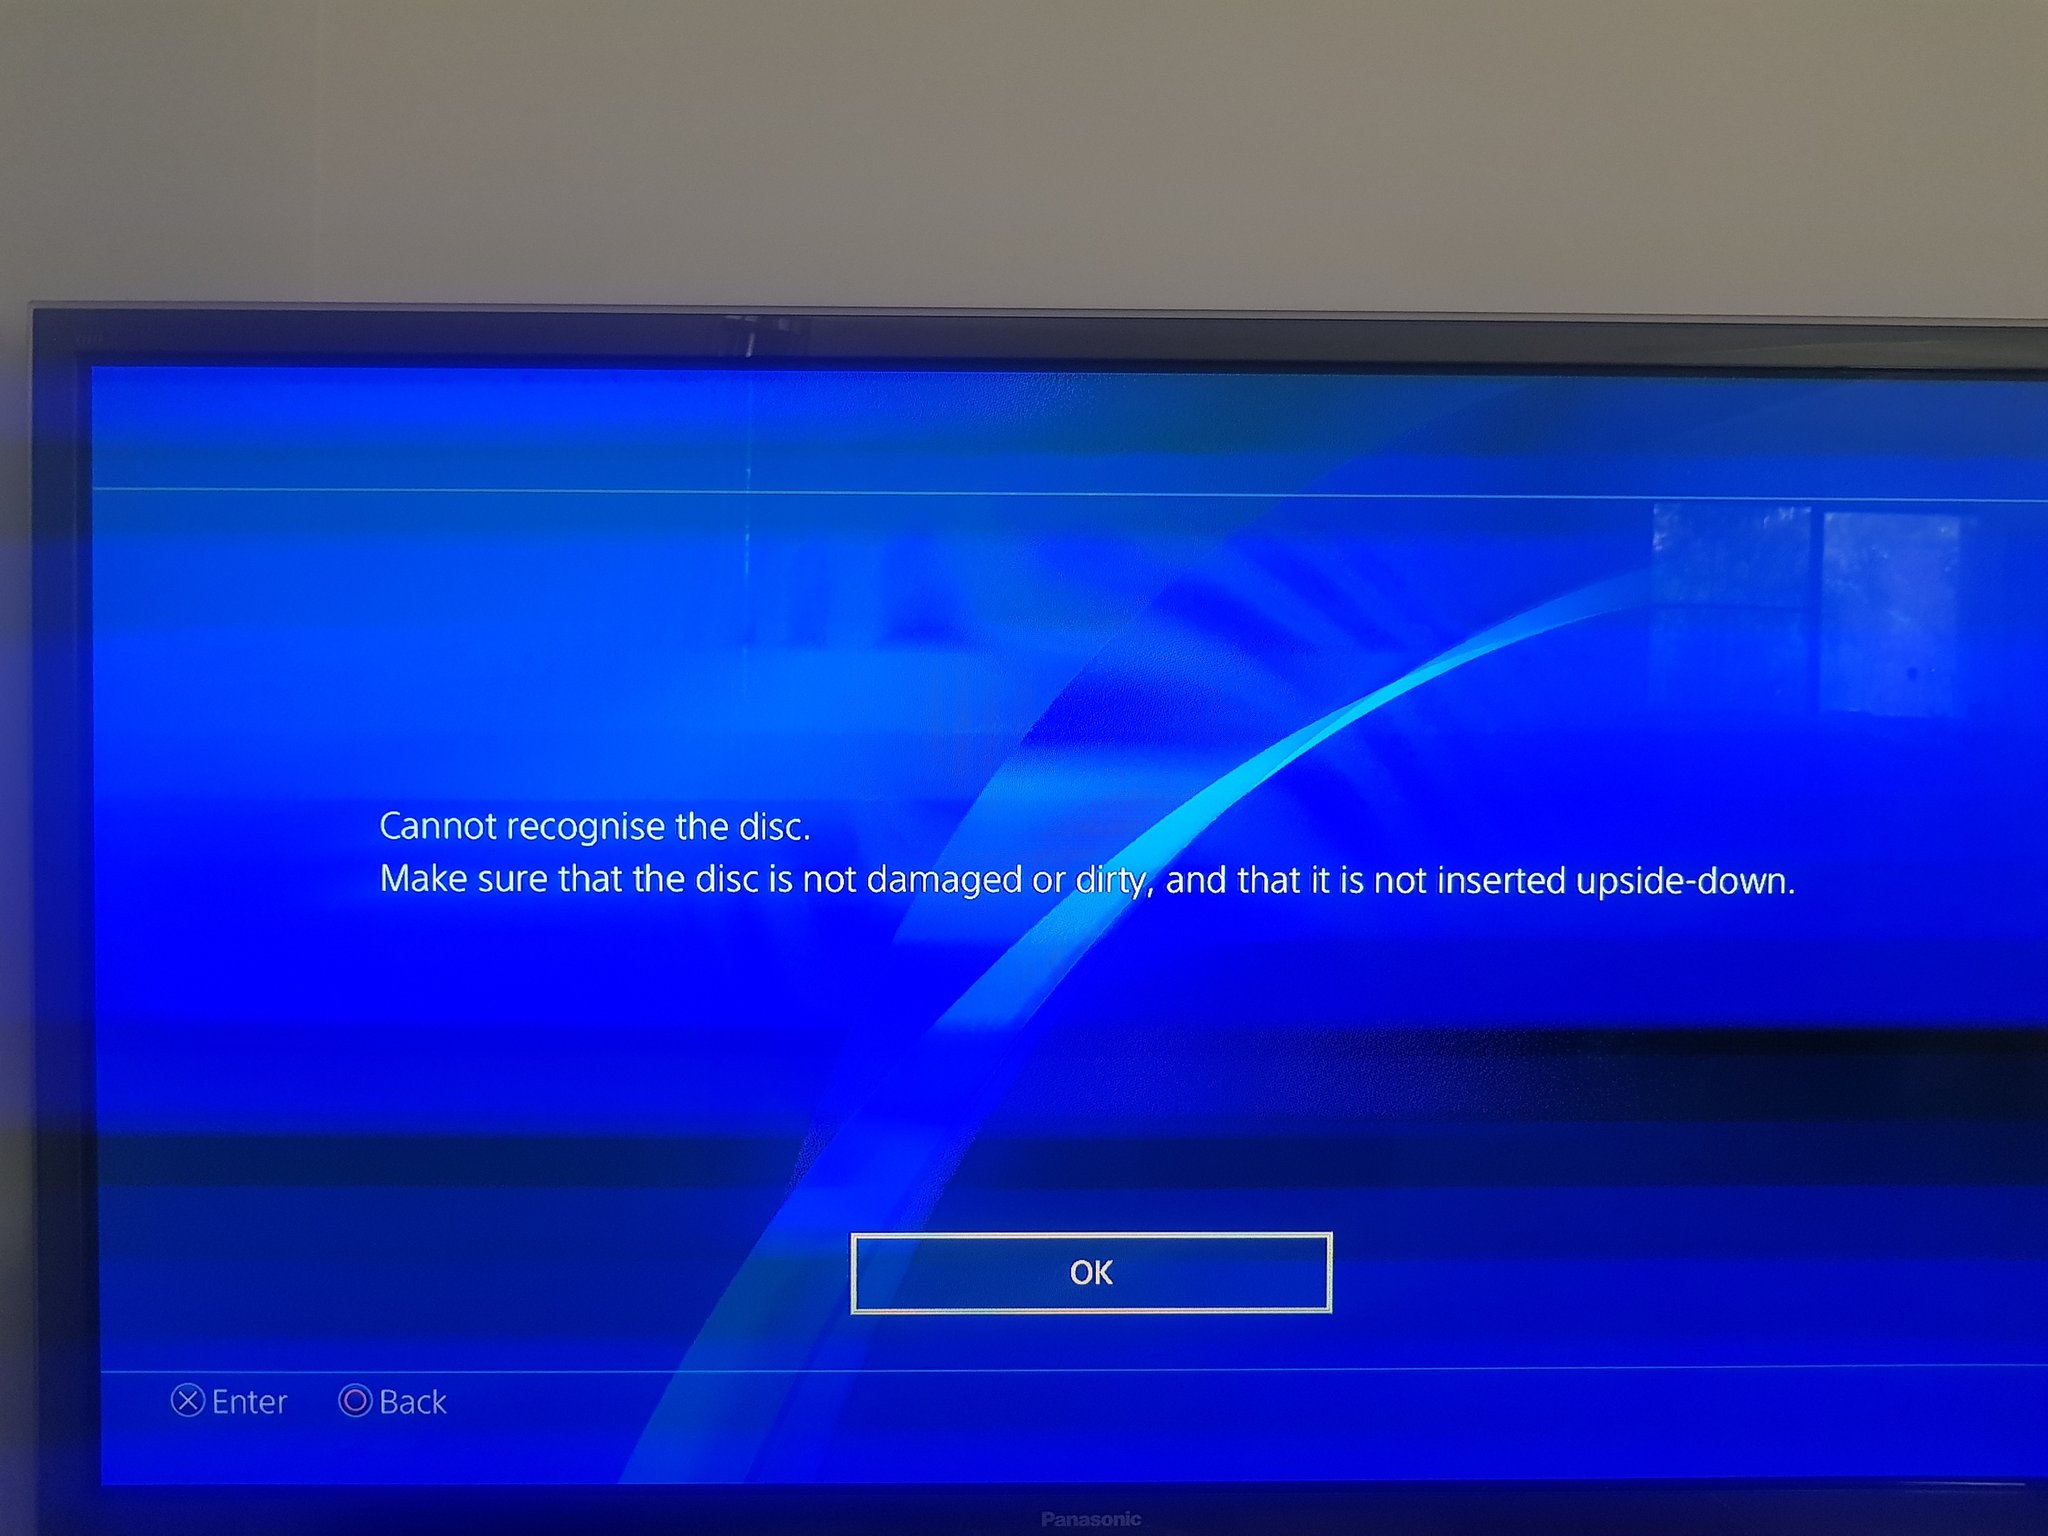 Ask PlayStation Twitter: "@hackulater Hi there! Sorry to read that your console is not working properly. Please select your console here: https://t.co/eC1vdKi5Wm and follow the "Disc" troubleshooting steps." / Twitter